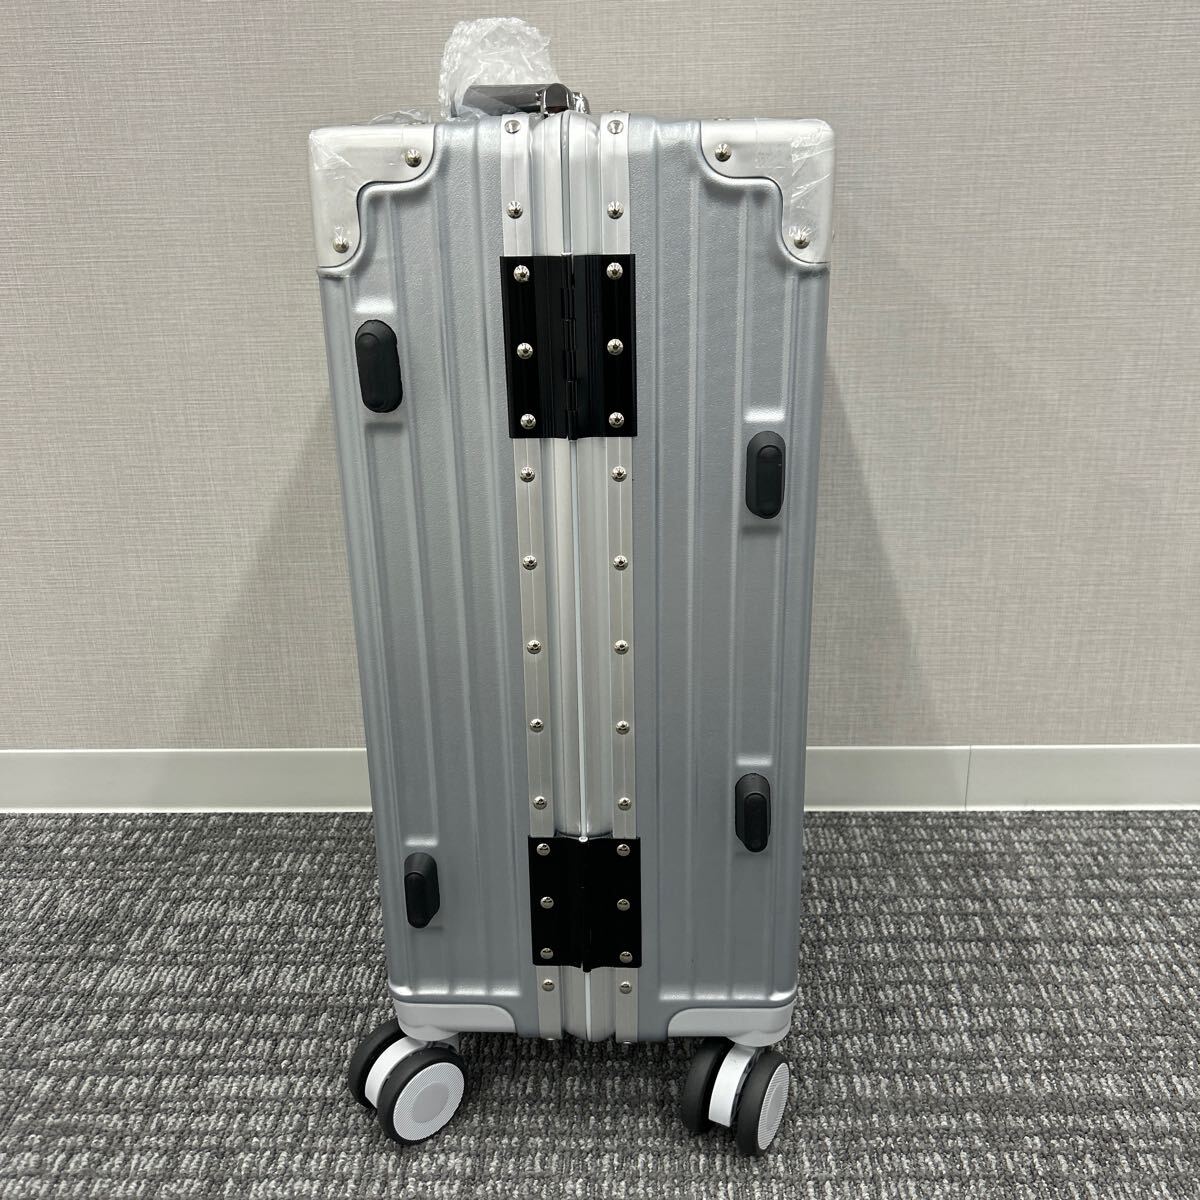  Carry case suitcase machine inside bringing in 40L carry bag silver 2